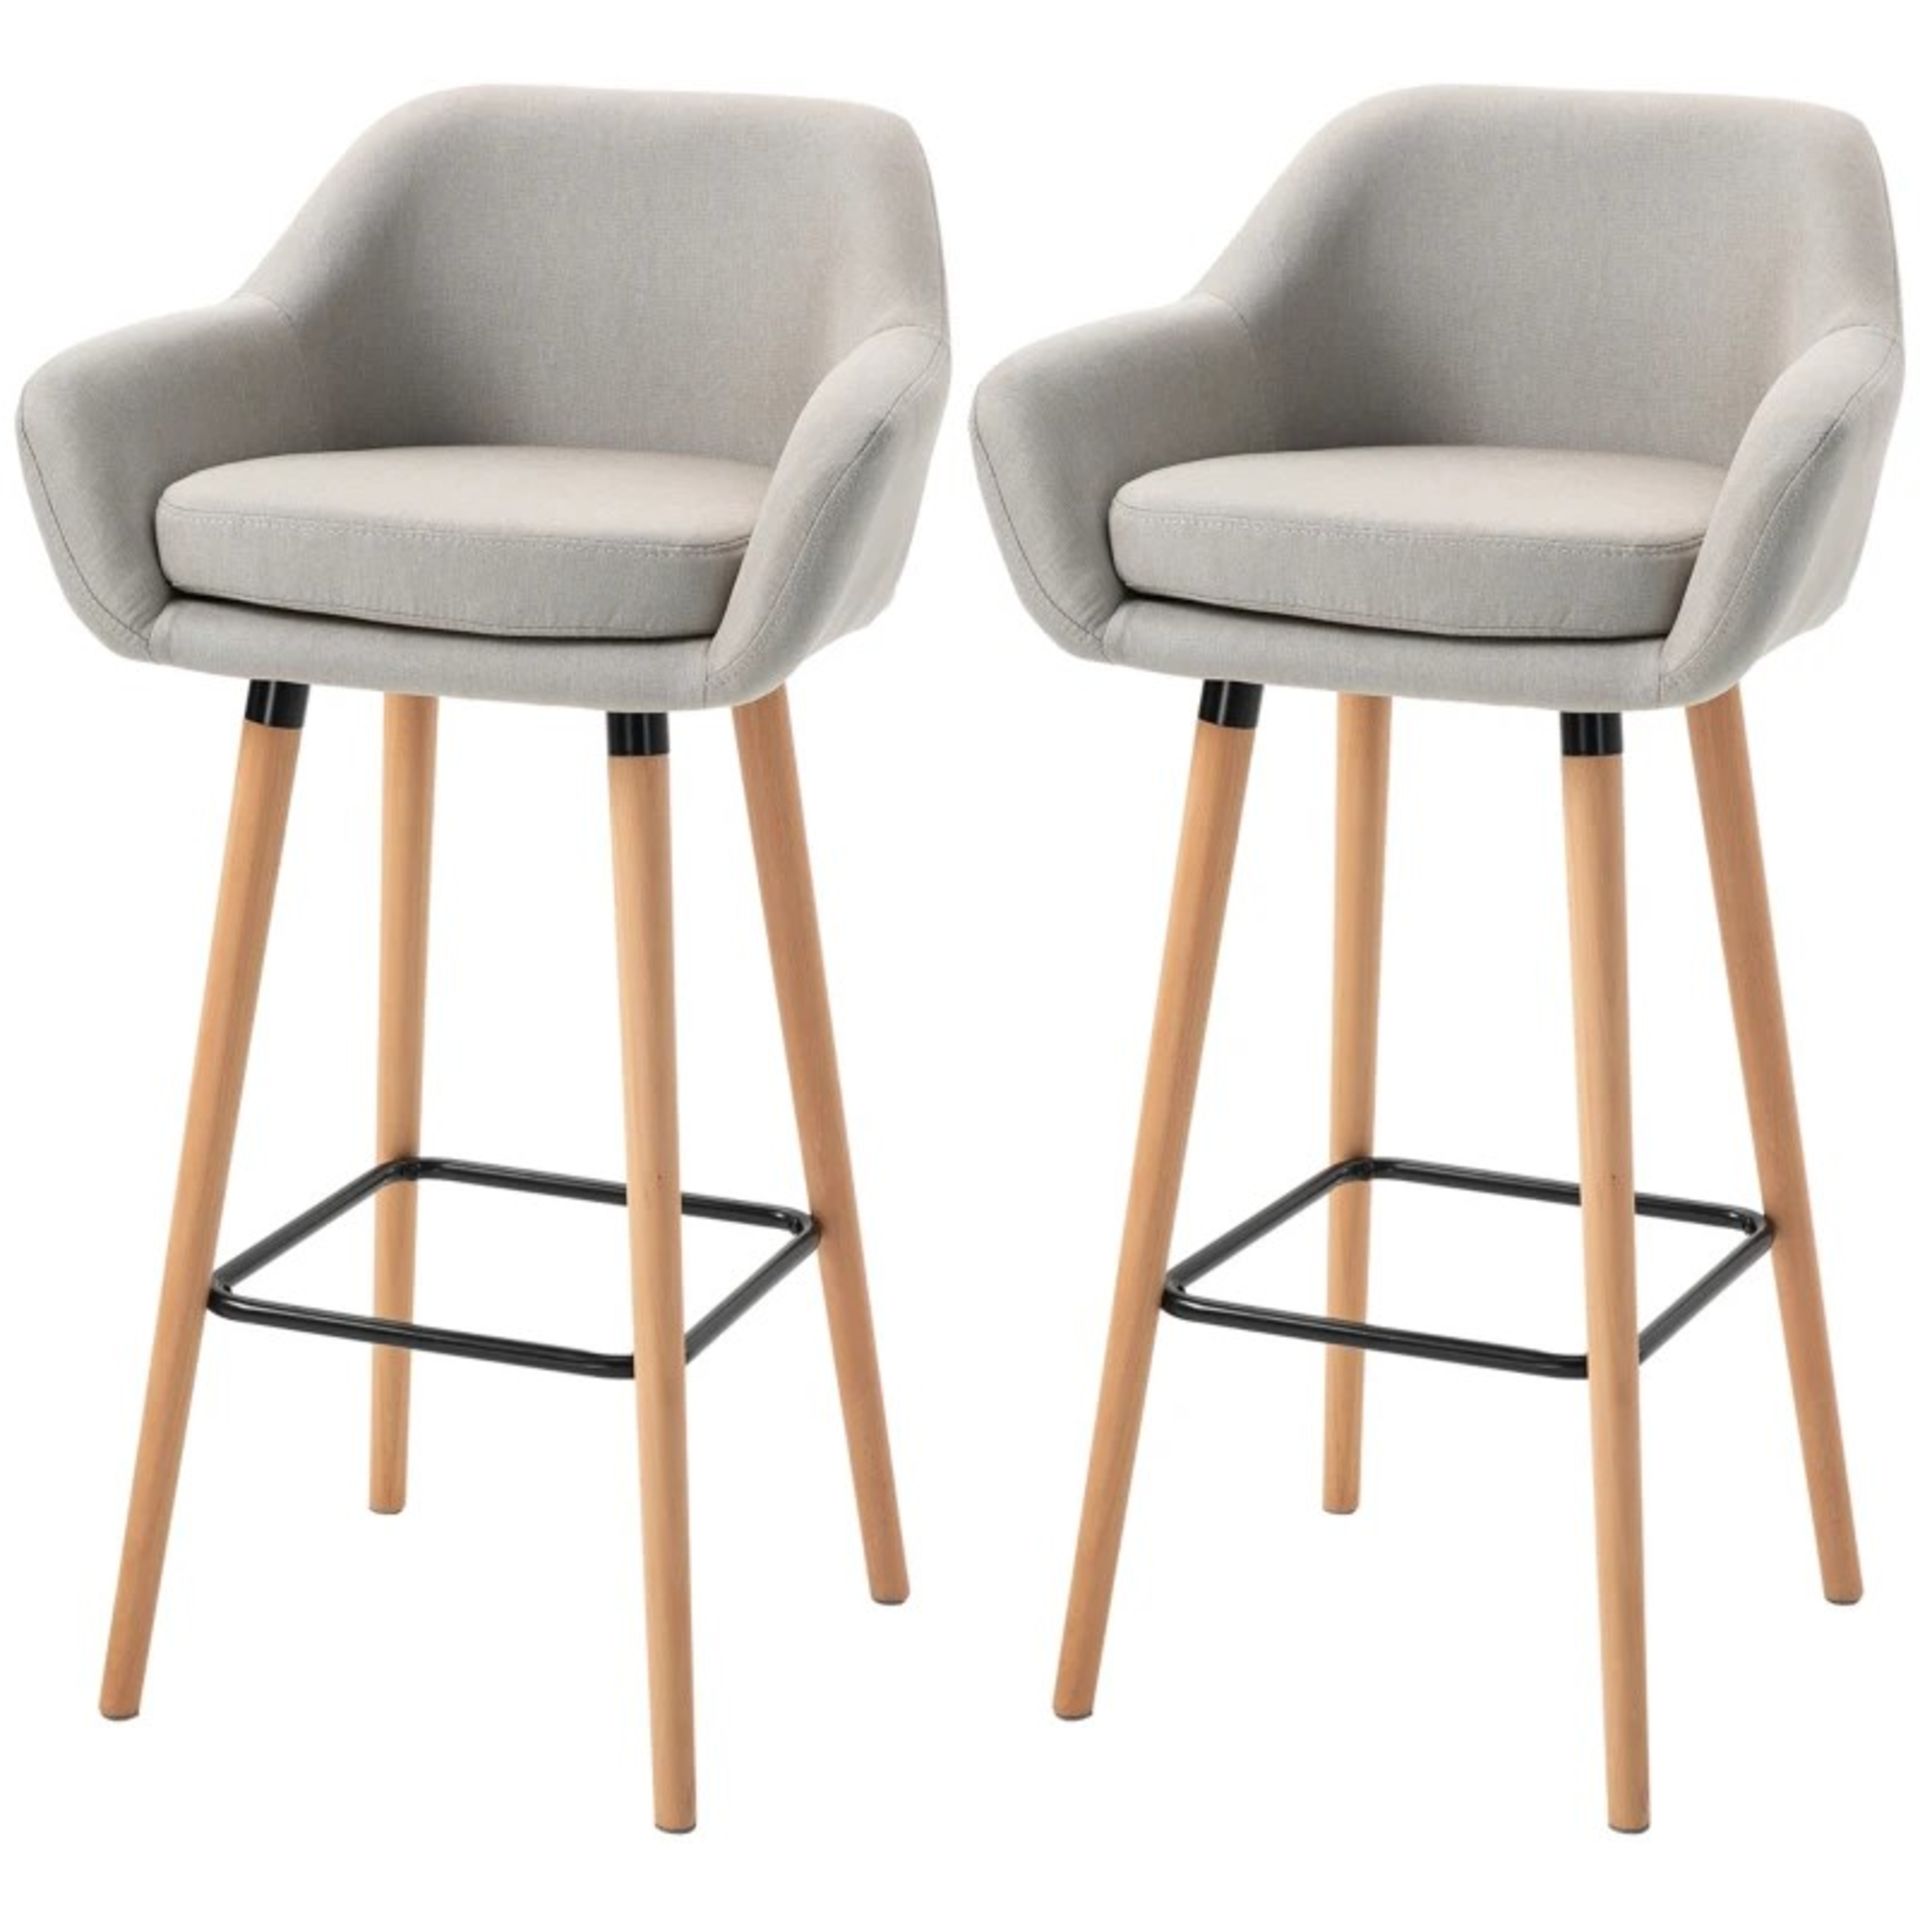 RRP £162.99 - Set of 2 Bar Stools Modern Upholstered Seat Bar Chairs w/ Metal Frame, Solid Wood Legs - Image 2 of 5